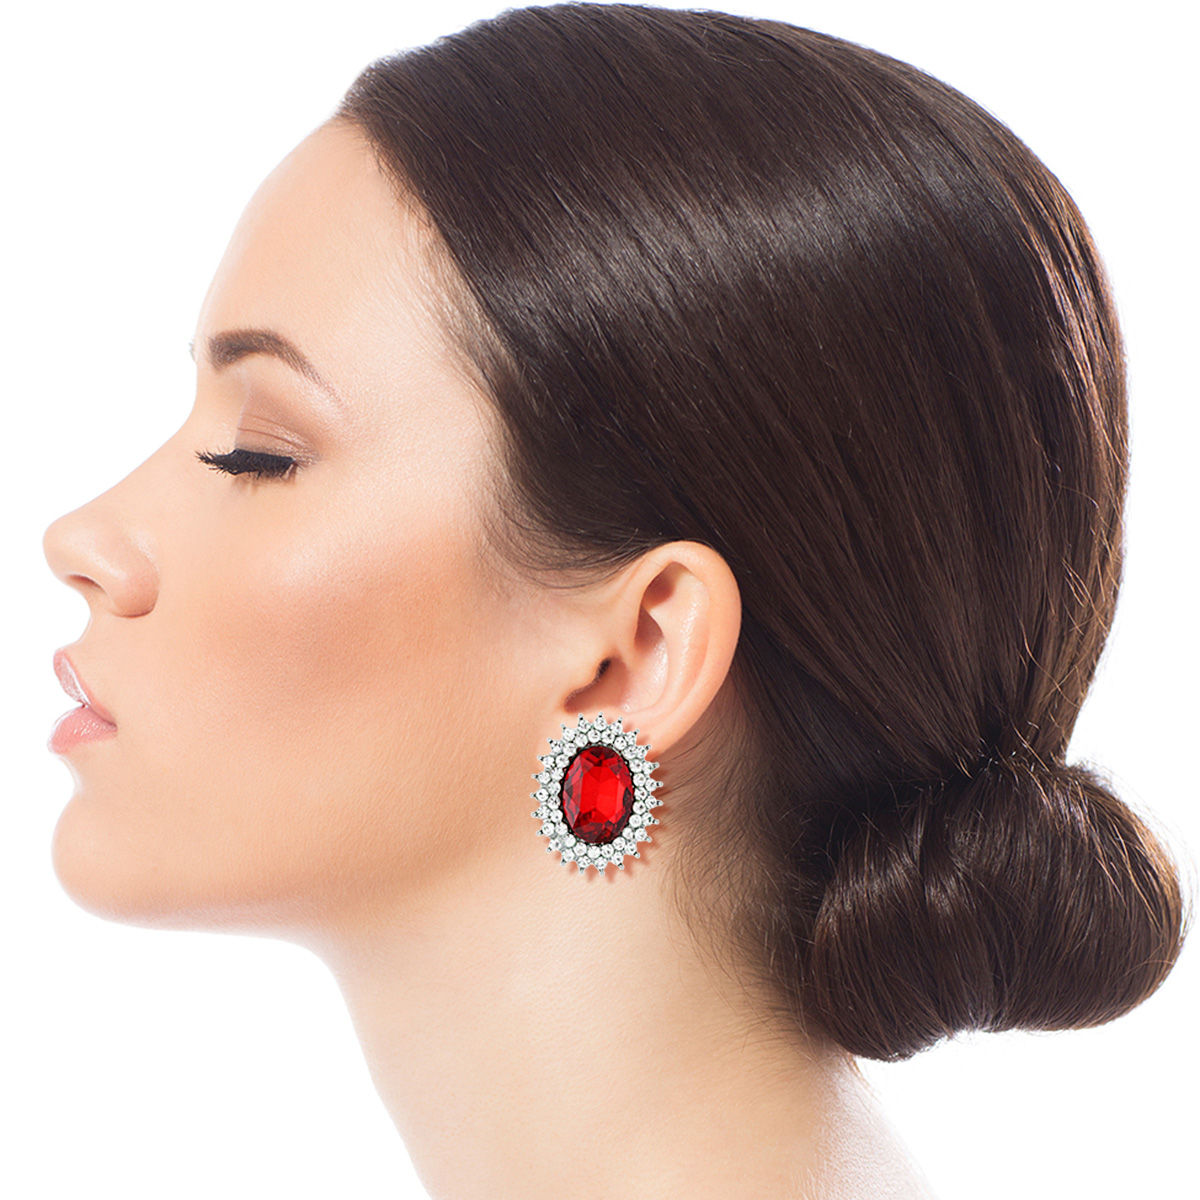 Oval Red Crystal Studs